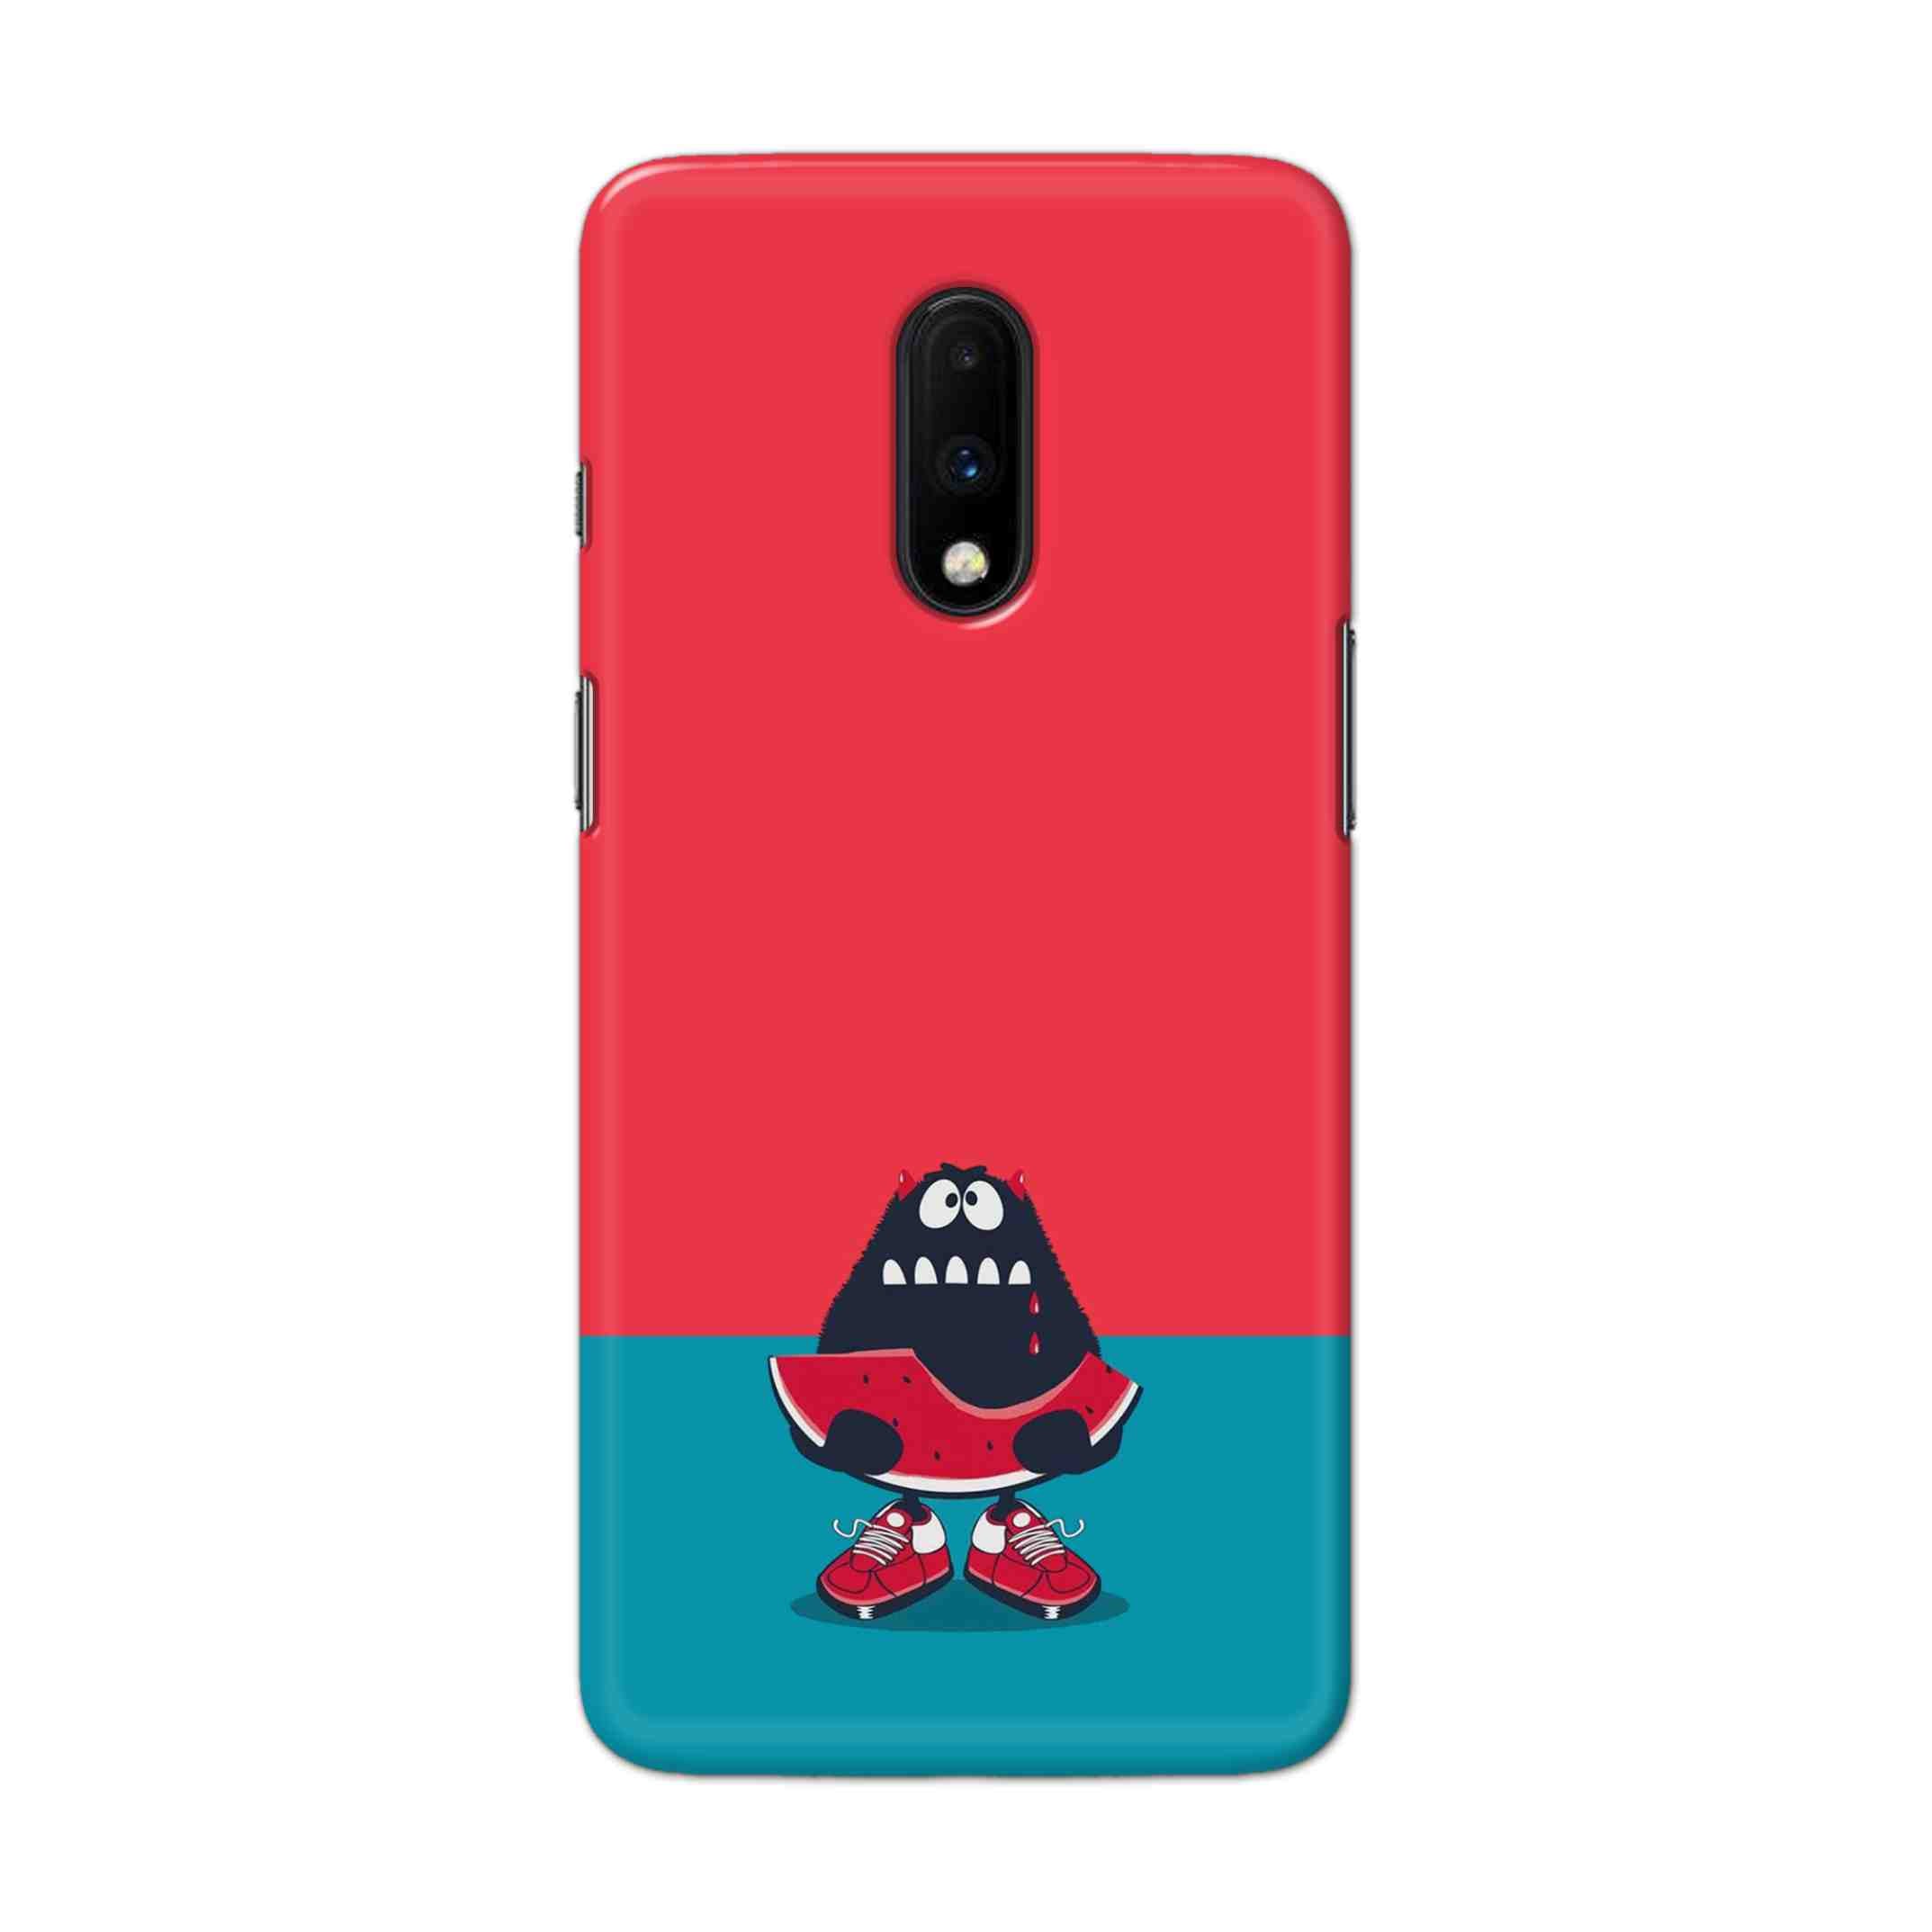 Buy Watermelon Hard Back Mobile Phone Case Cover For OnePlus 7 Online